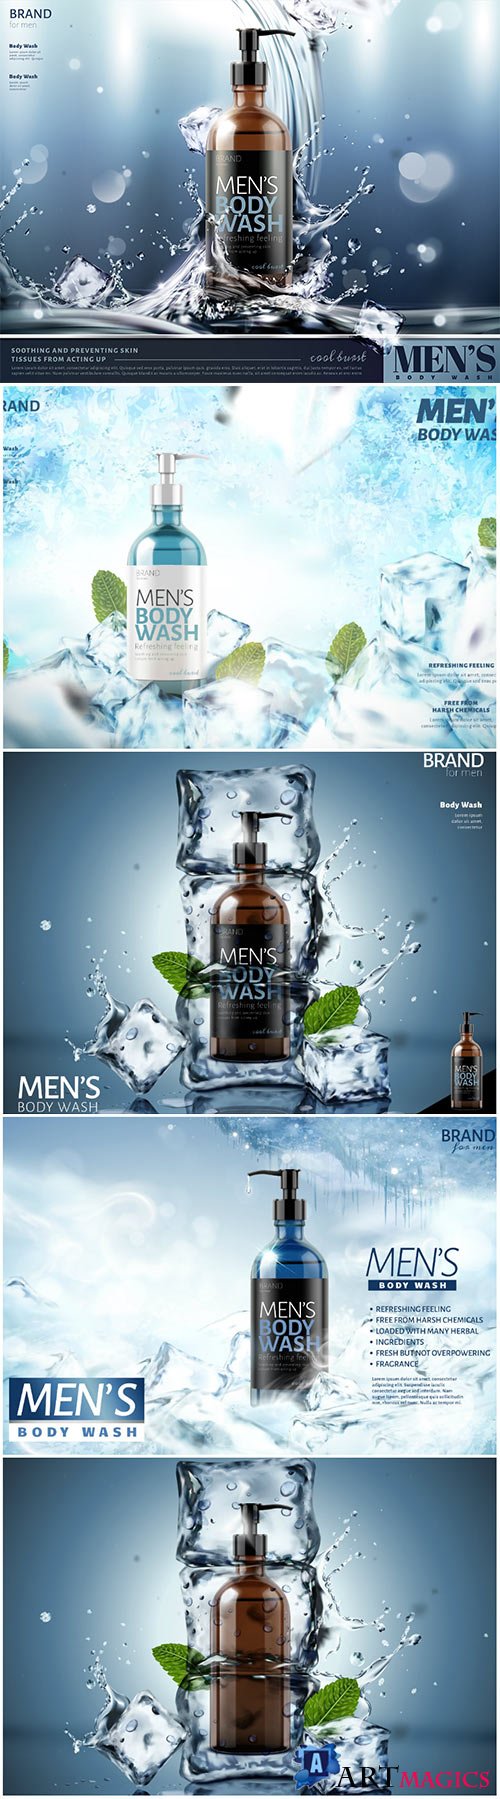 Men's body wash vector poster ads with splashing water and ice cubes in 3d illustration